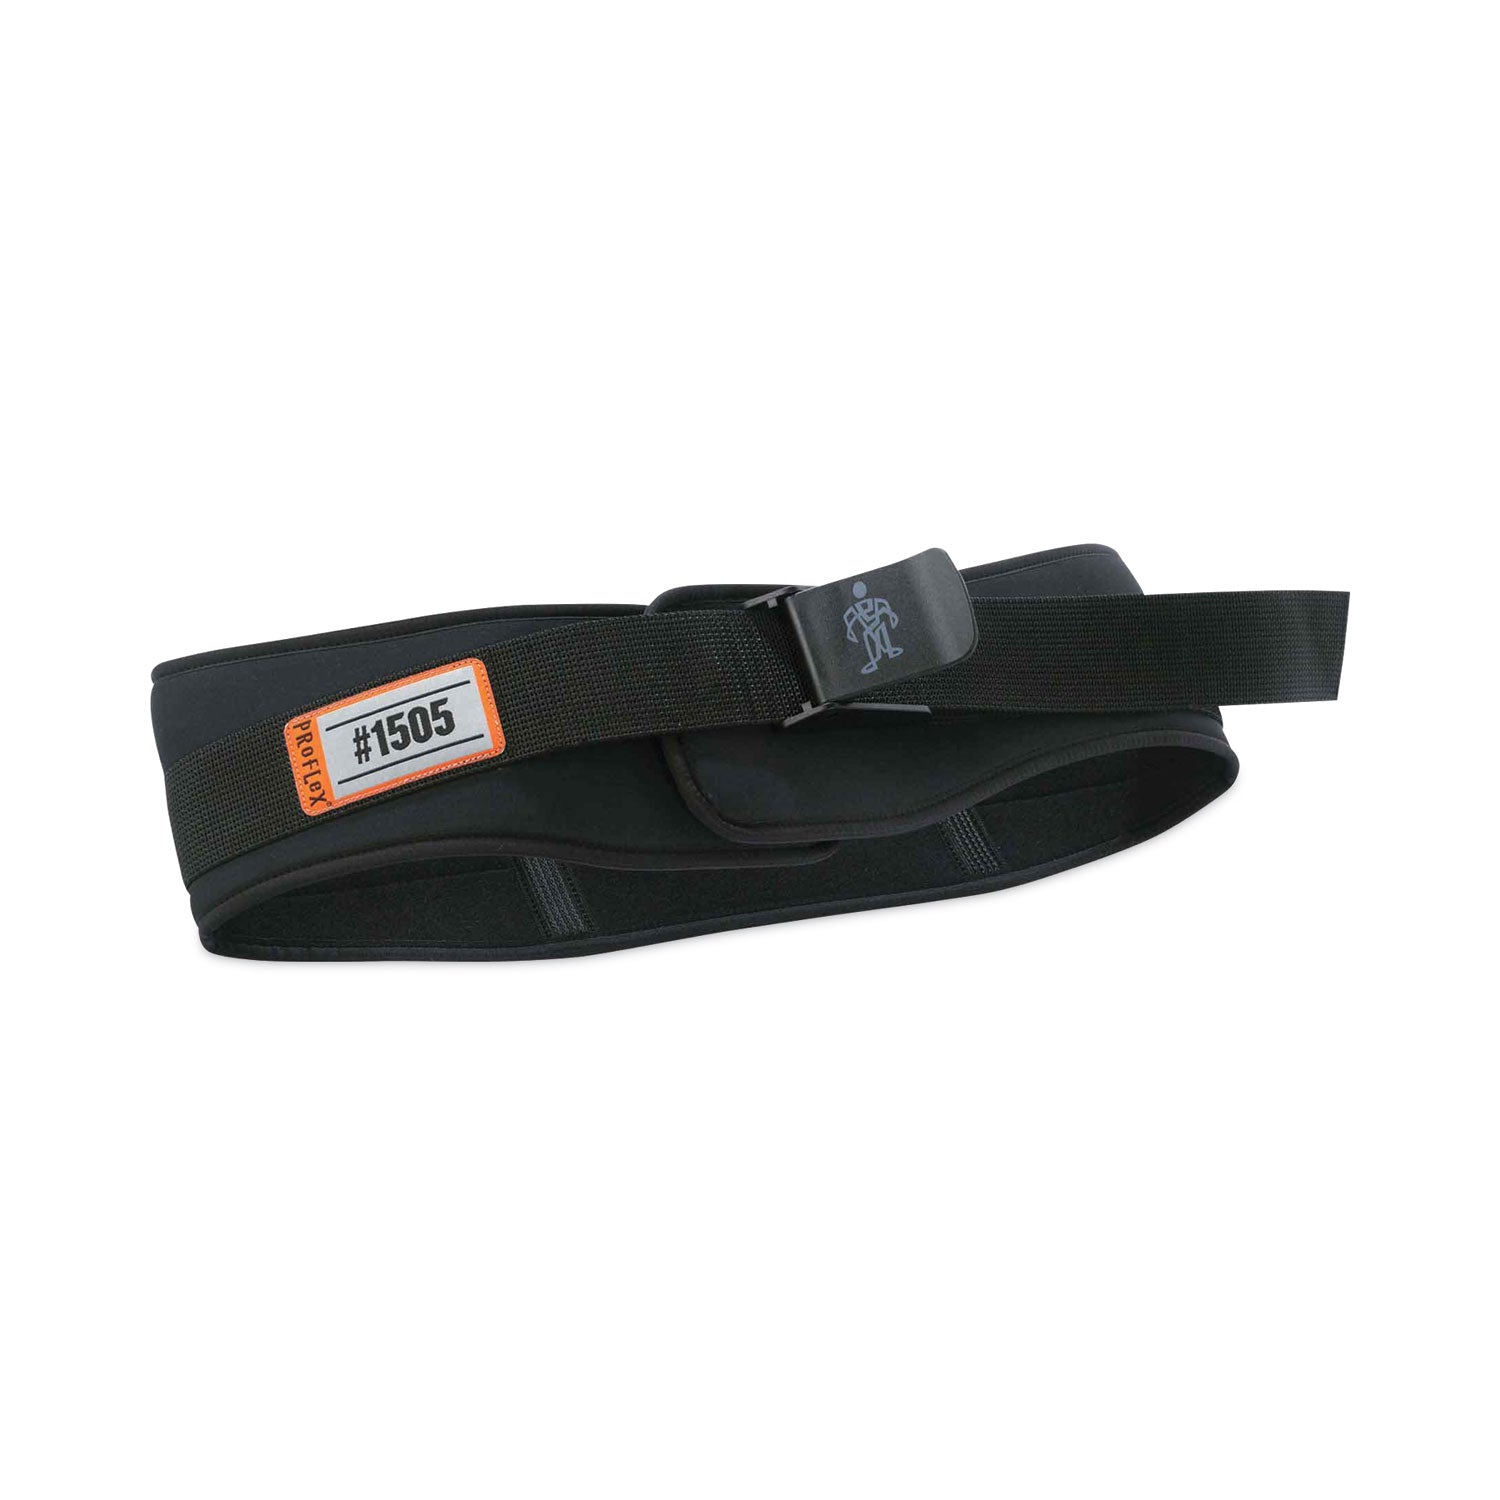 proflex-1505-low-profile-weight-lifters-back-support-belt-medium-30-to-34-waist-black-ships-in-1-3-business-days_ego11492 - 1